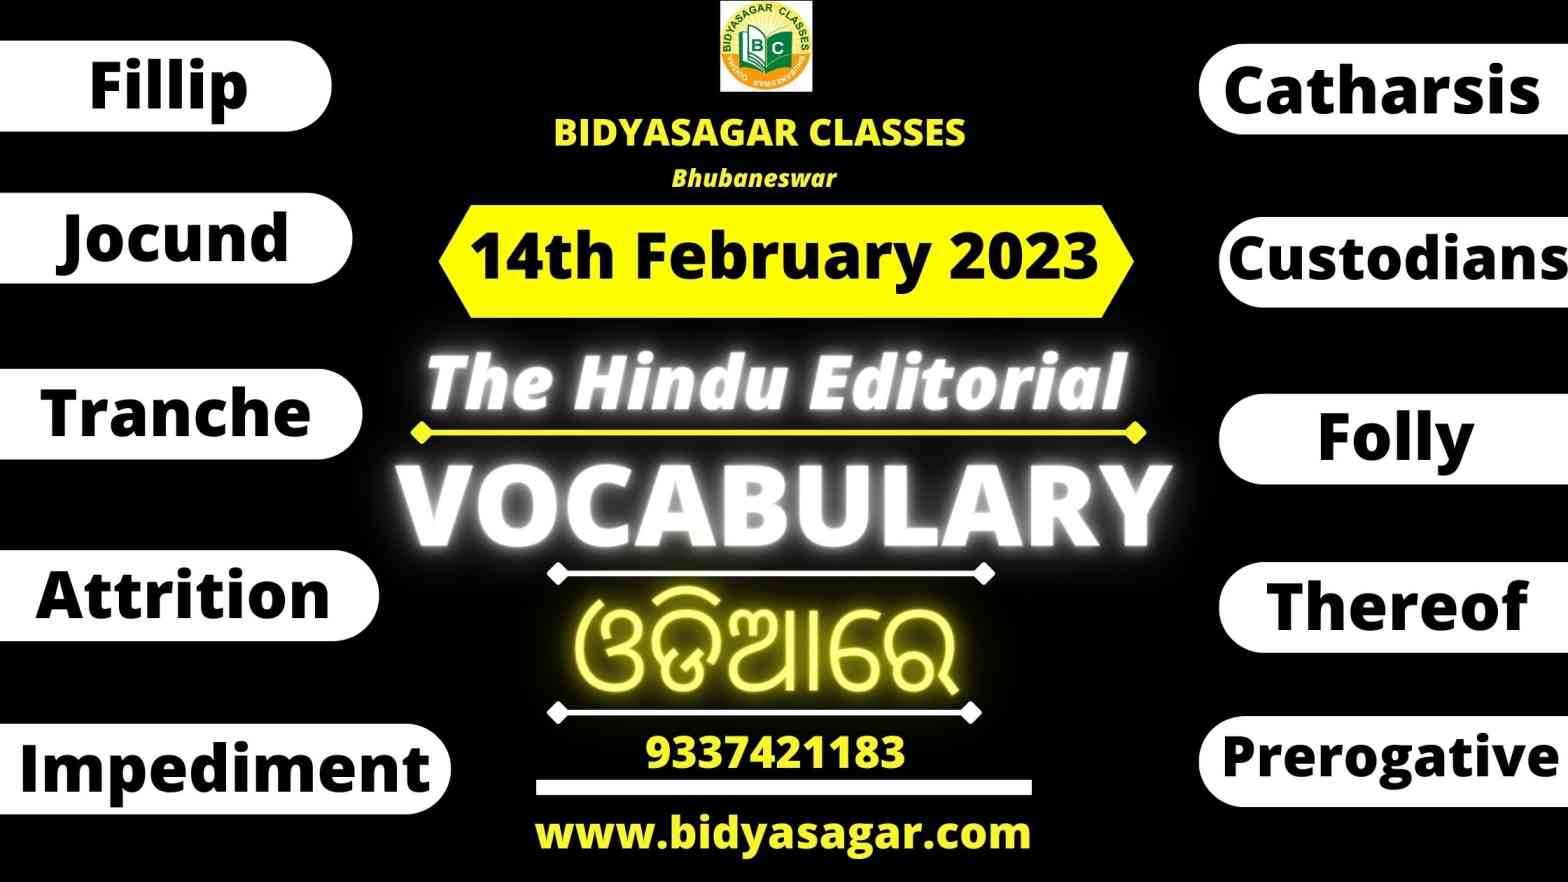 The Hindu Editorial Vocabulary of 14th February 2023